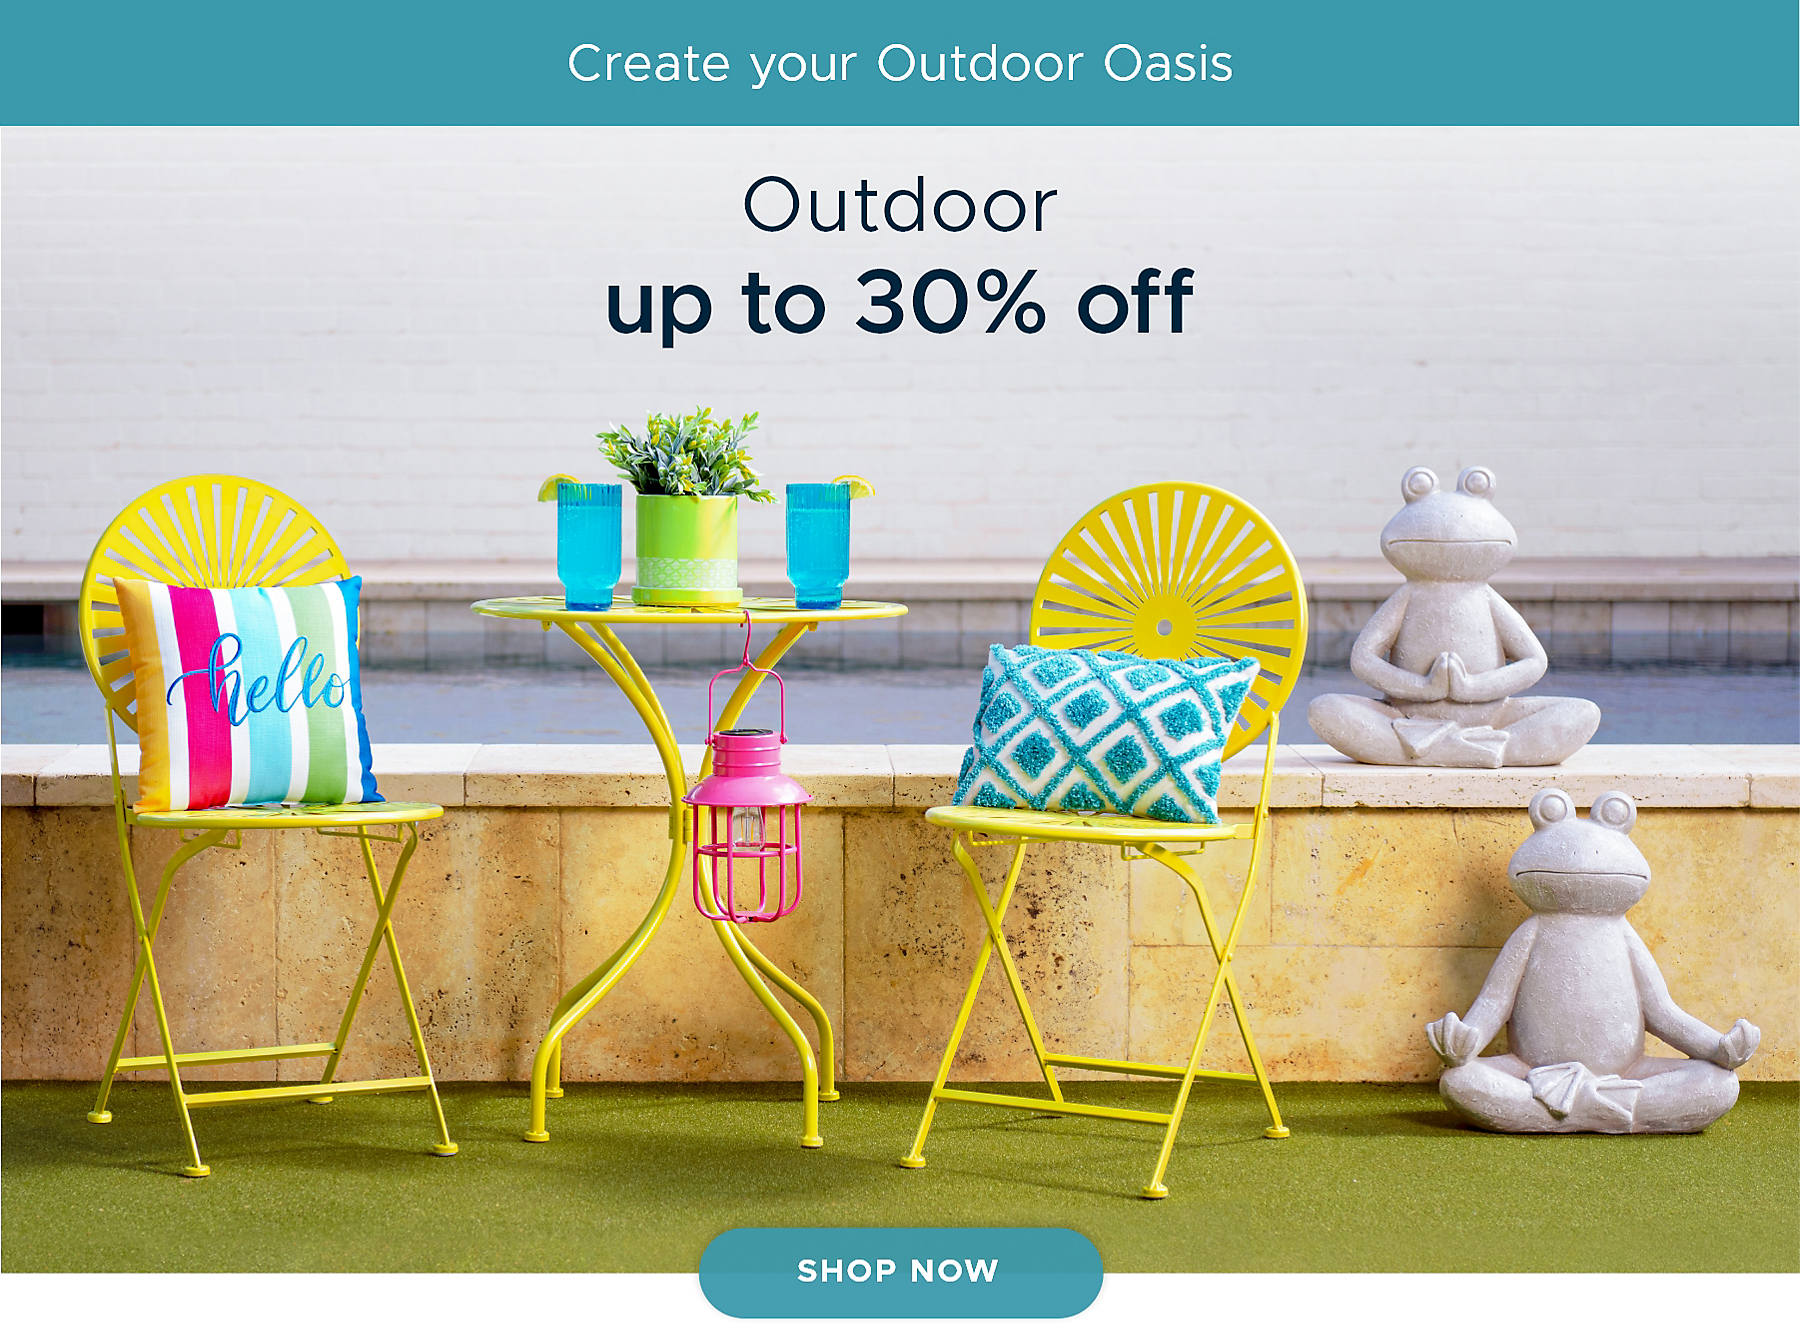 Create your Outdoor Oasis Outdoor up to 30% off shop now